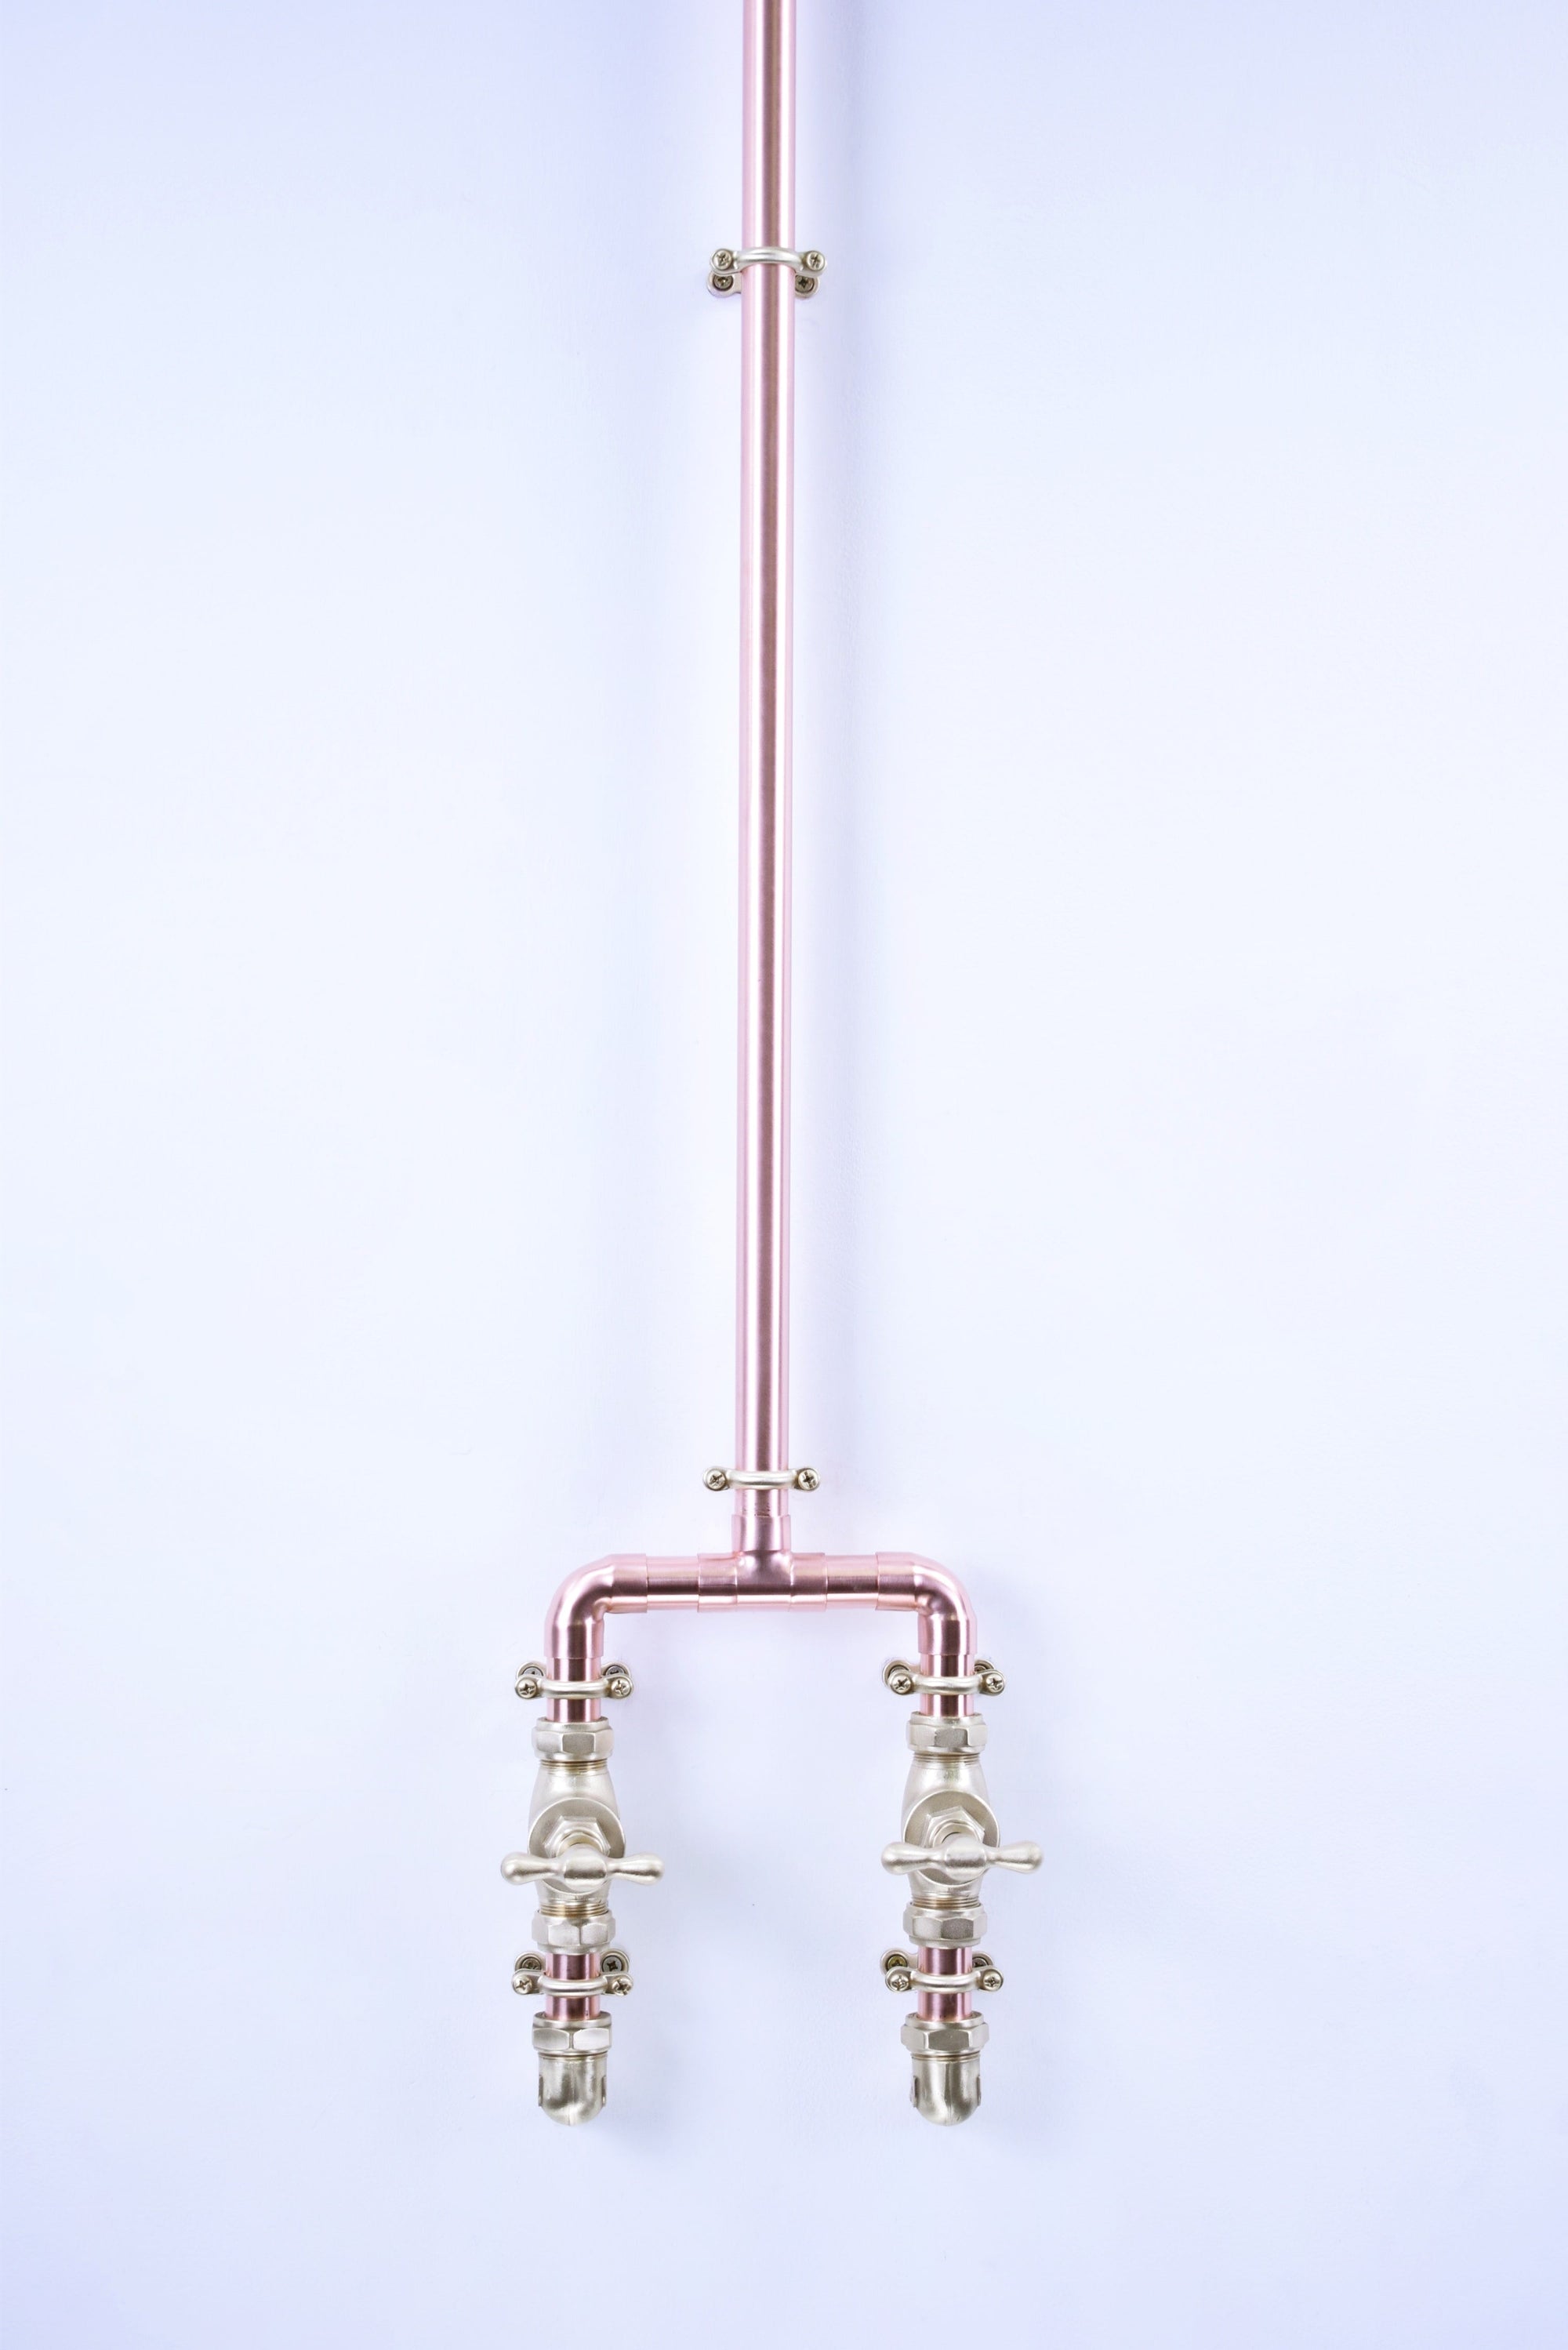 brass mixer taps with copper shower body